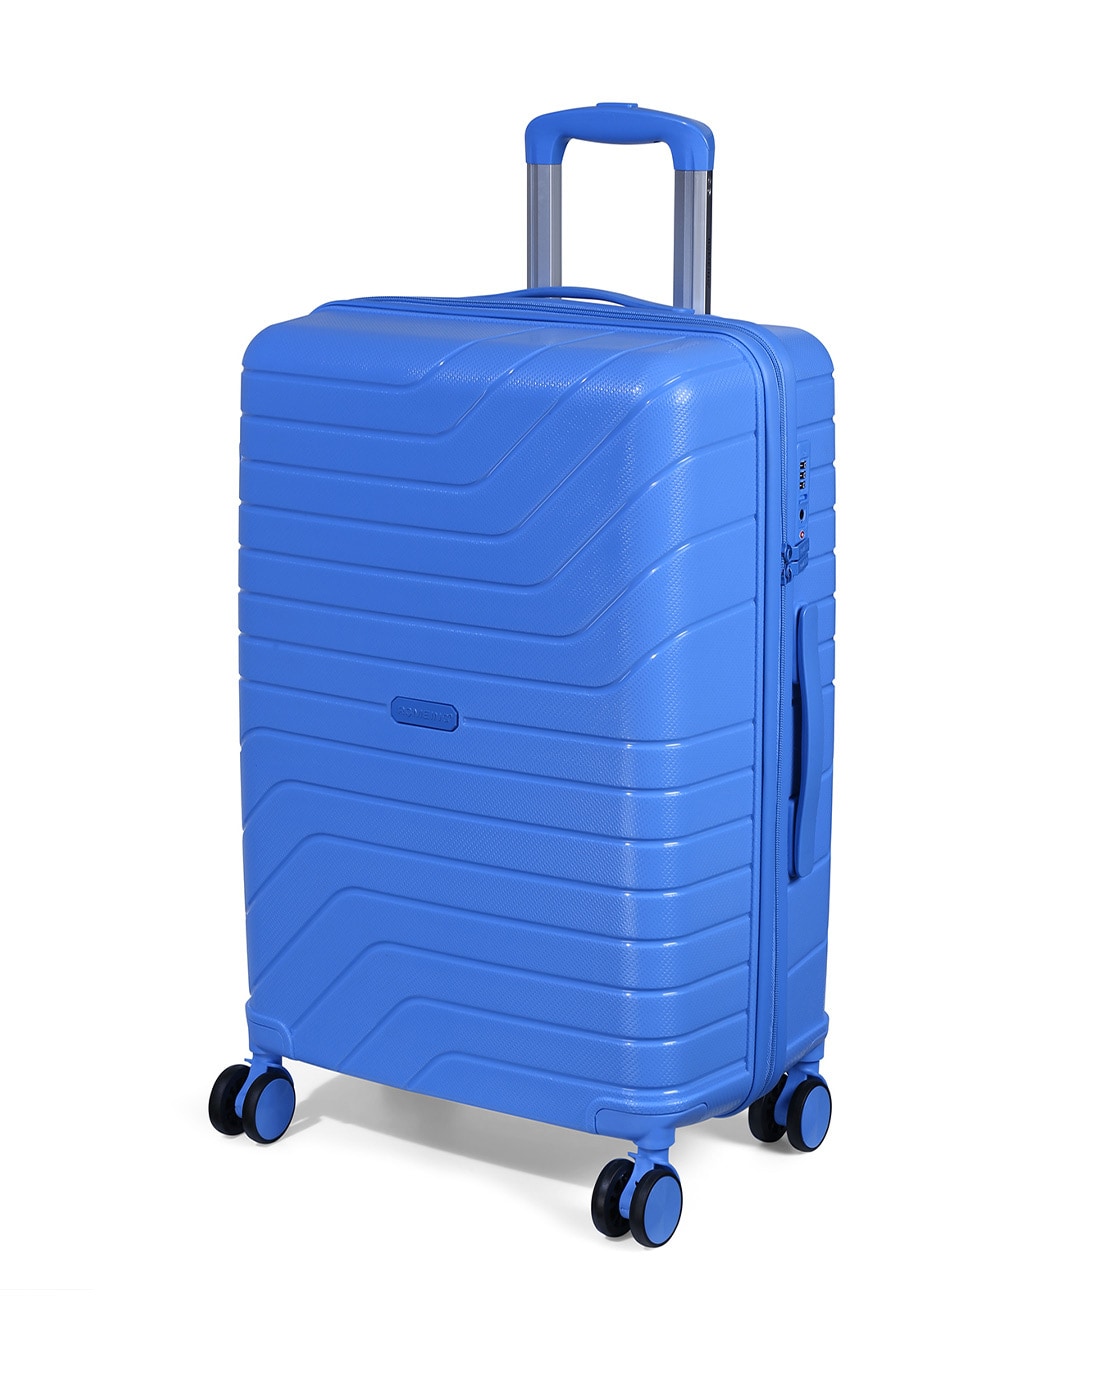 ROMEING Venice Rose Gold-Colored Textured Polycarbonate Medium Trolley Bag  Price in India, Full Specifications & Offers | DTashion.com